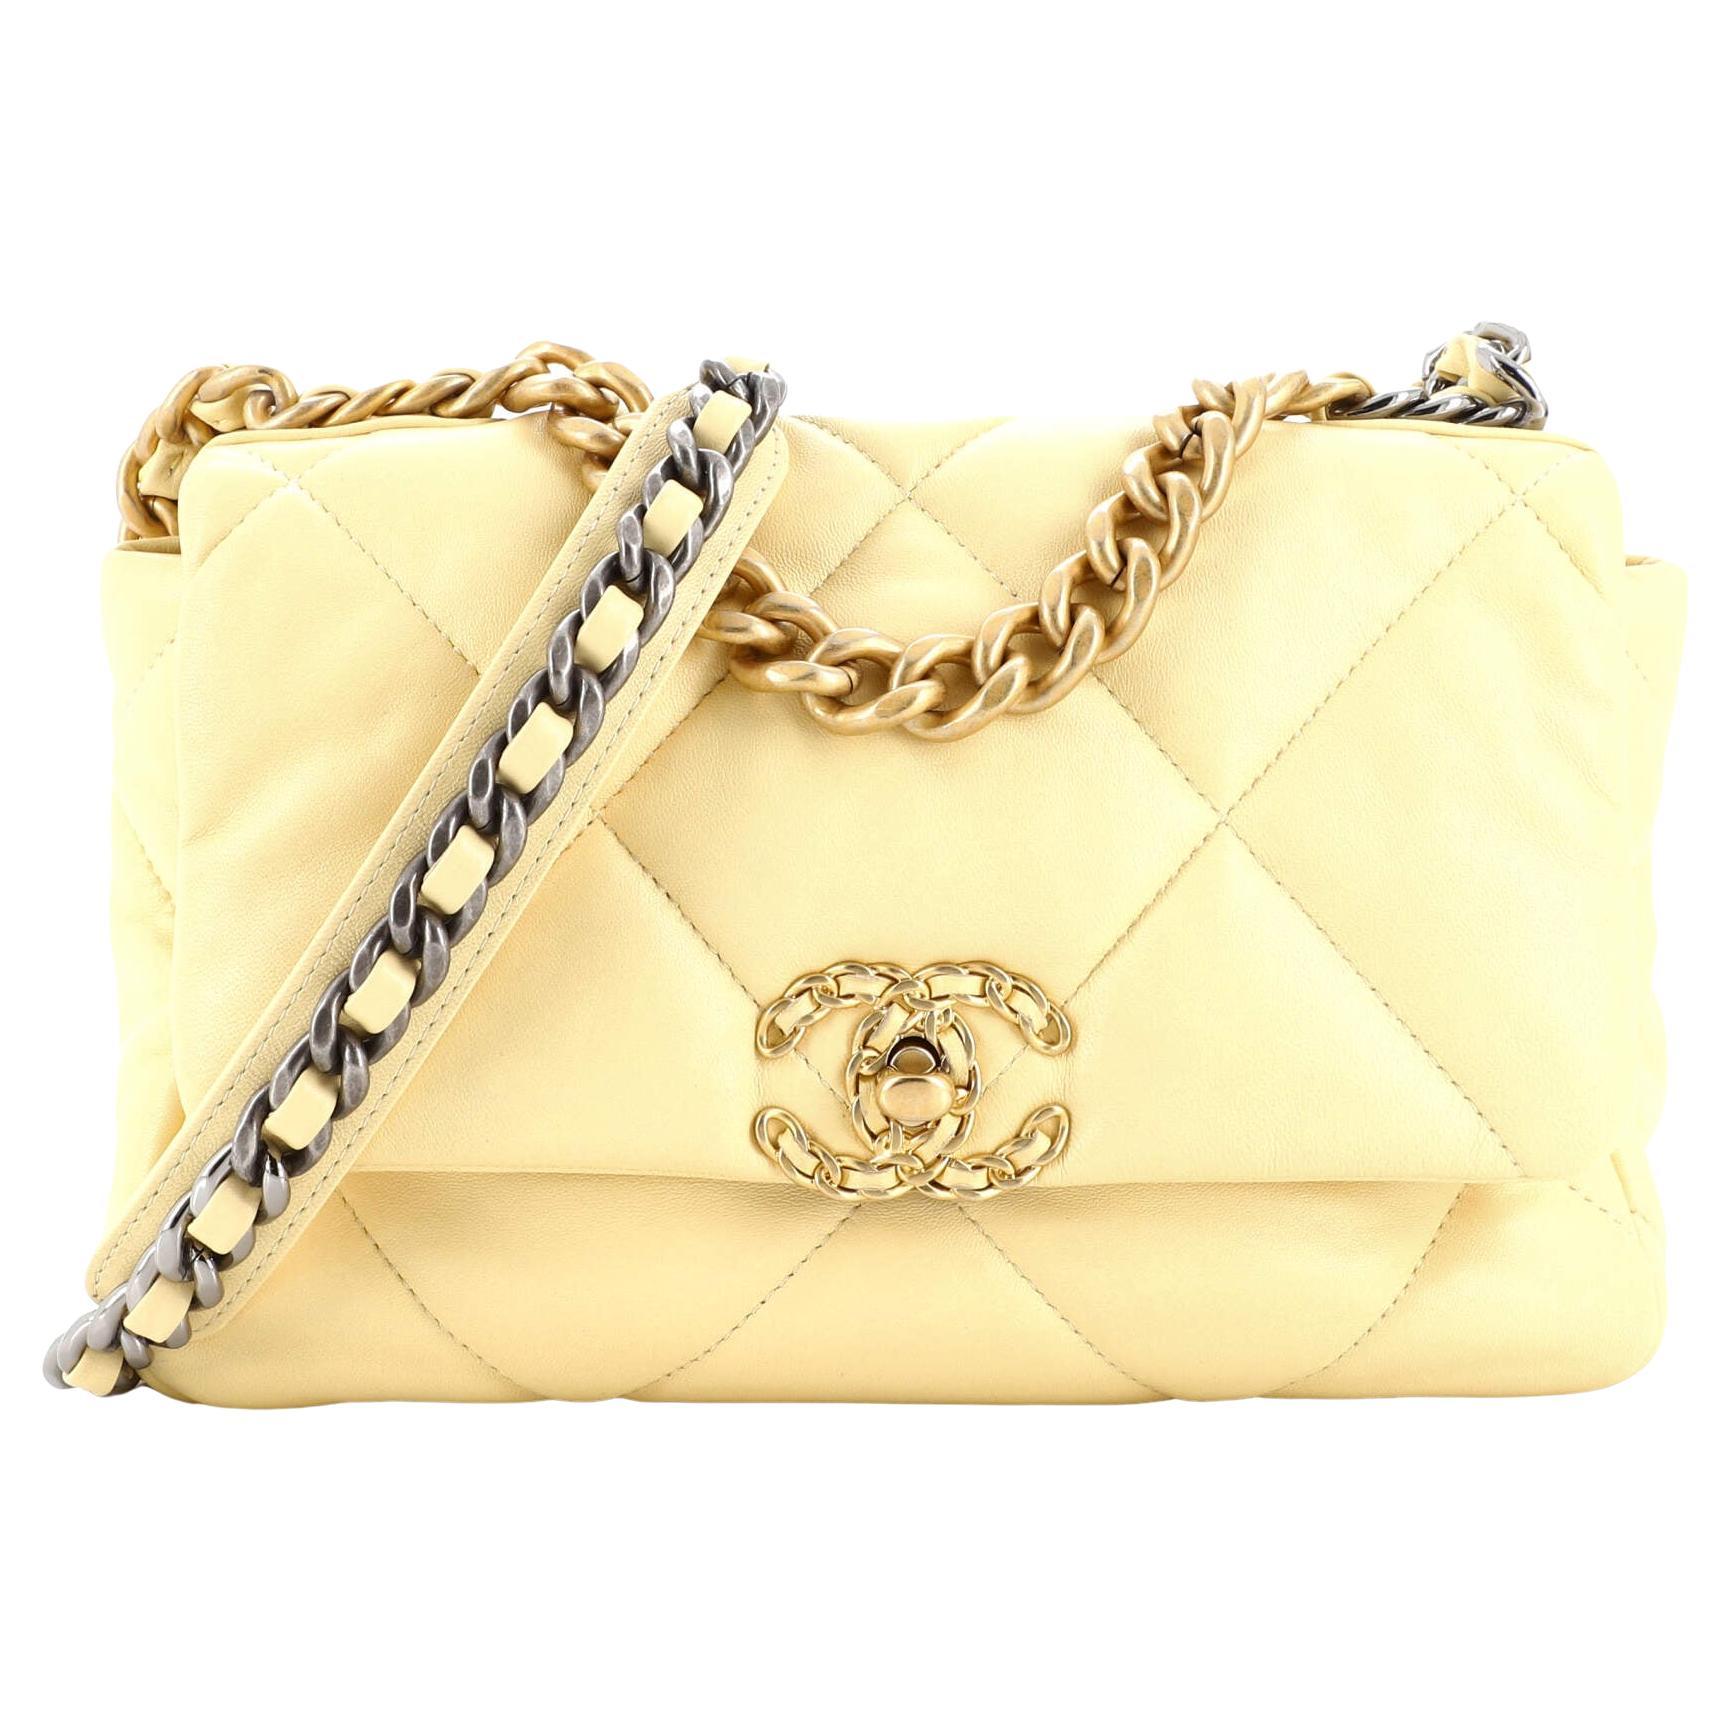 Chanel Classic shoulder bag in beige and coral quilted lambskin